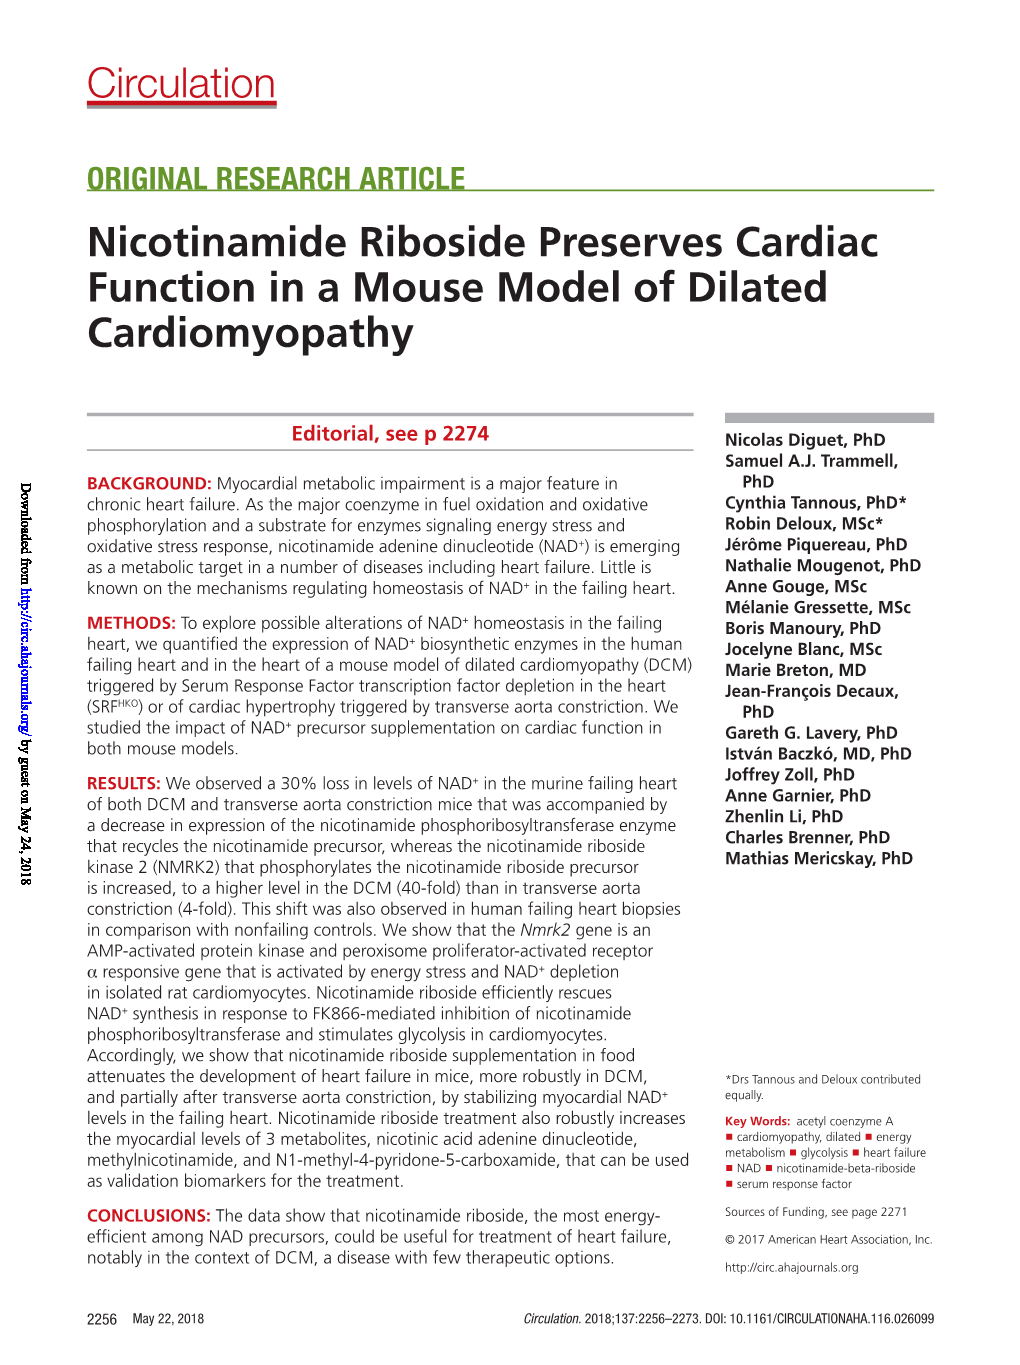 Nicotinamide Riboside Preserves Cardiac Function in a Mouse Model of Dilated Cardiomyopathy